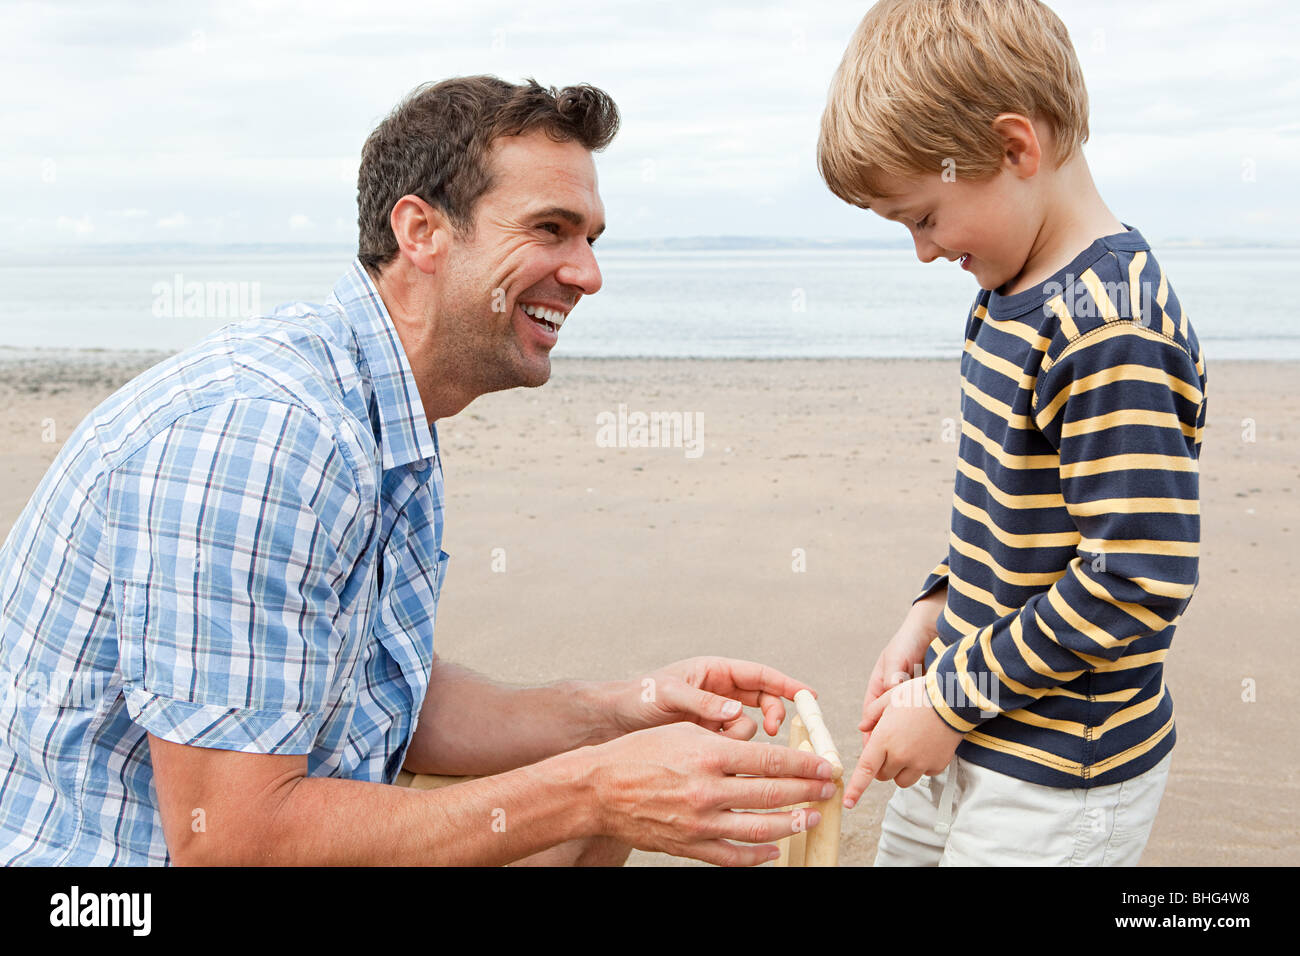 Father and son on beach with cricket stumps Stock Photo